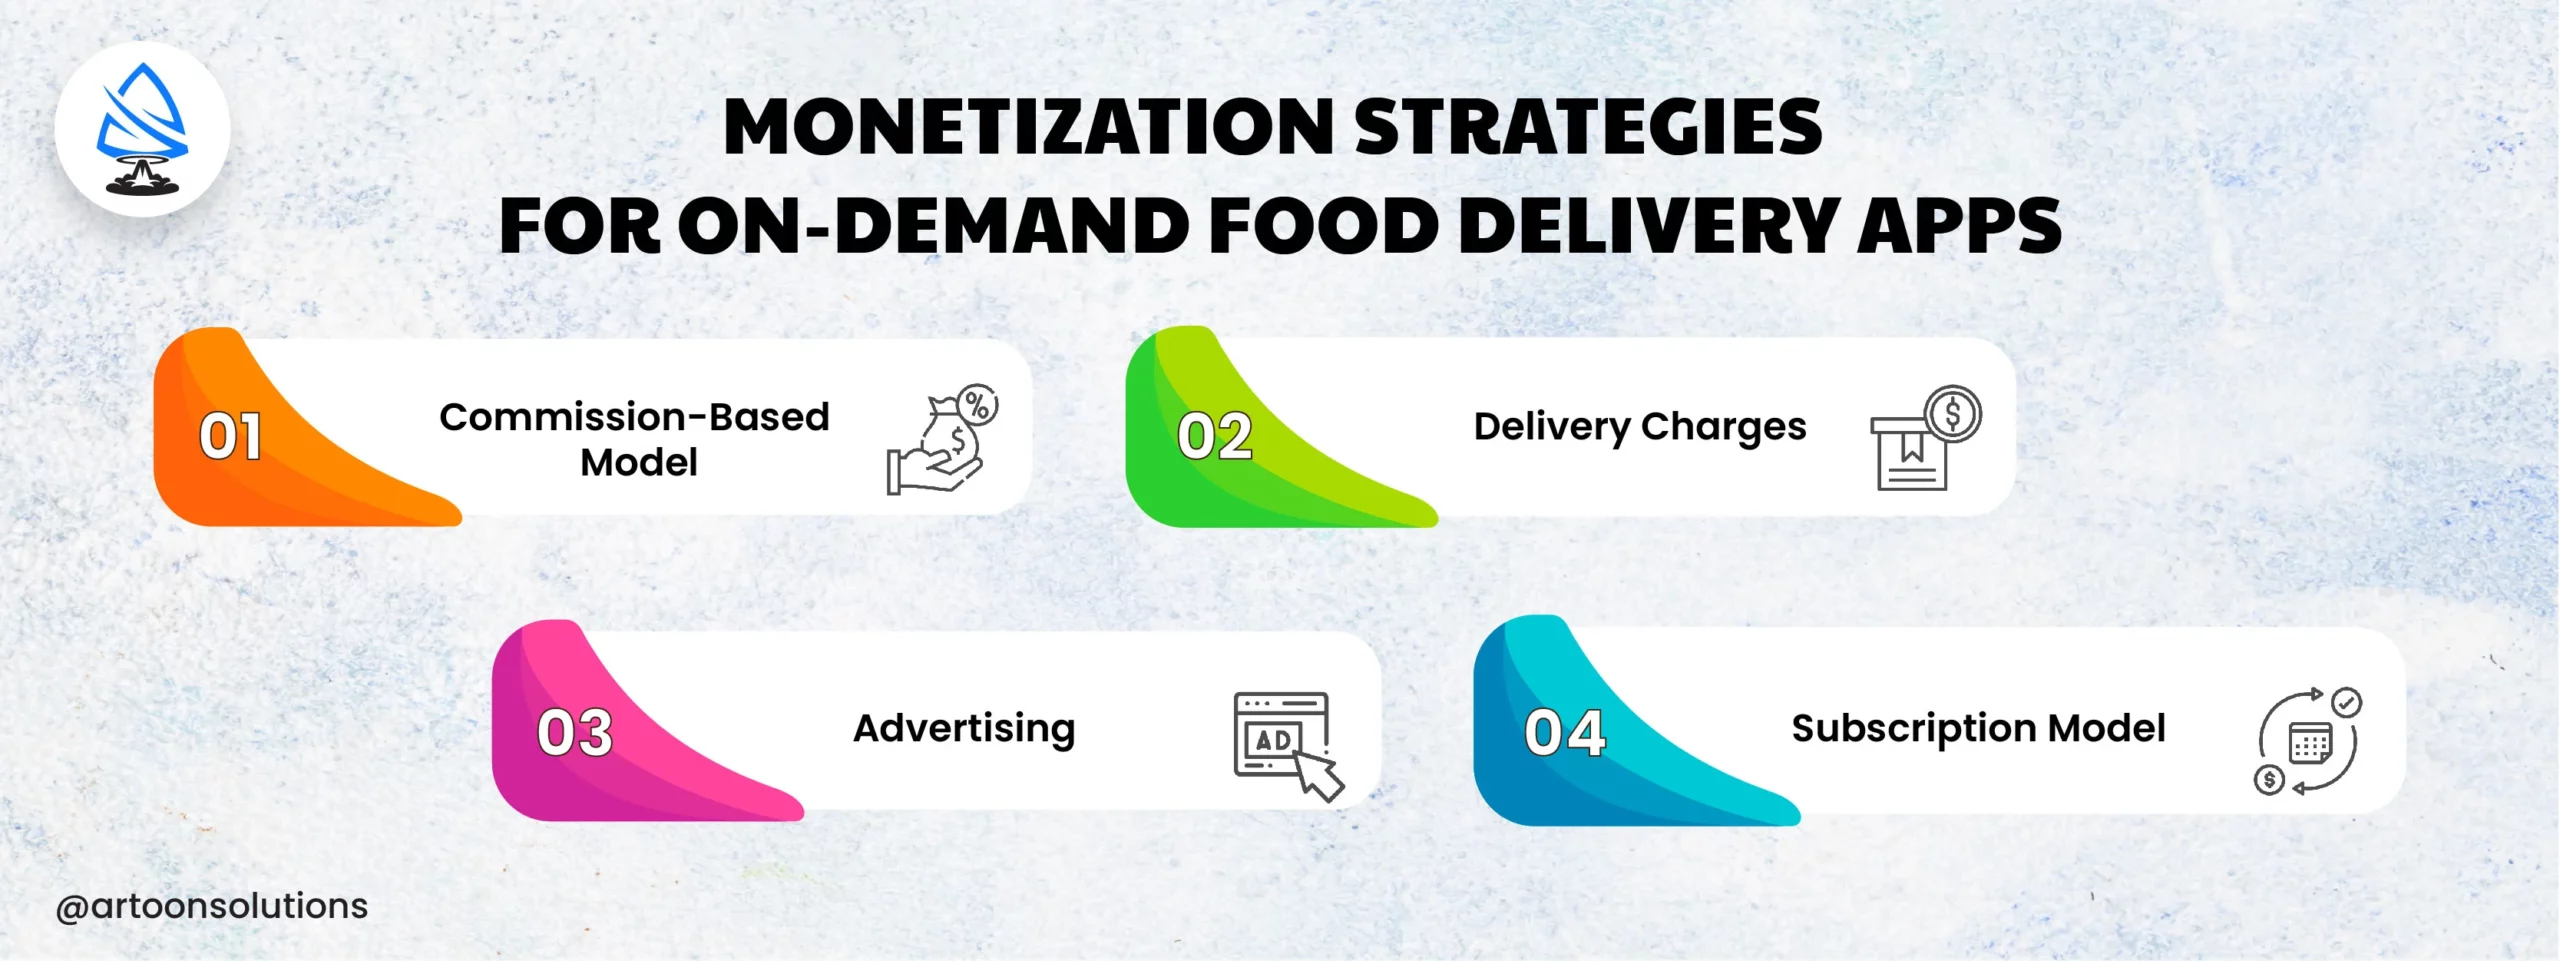 Monetization Strategies for On-Demand Food Delivery Apps